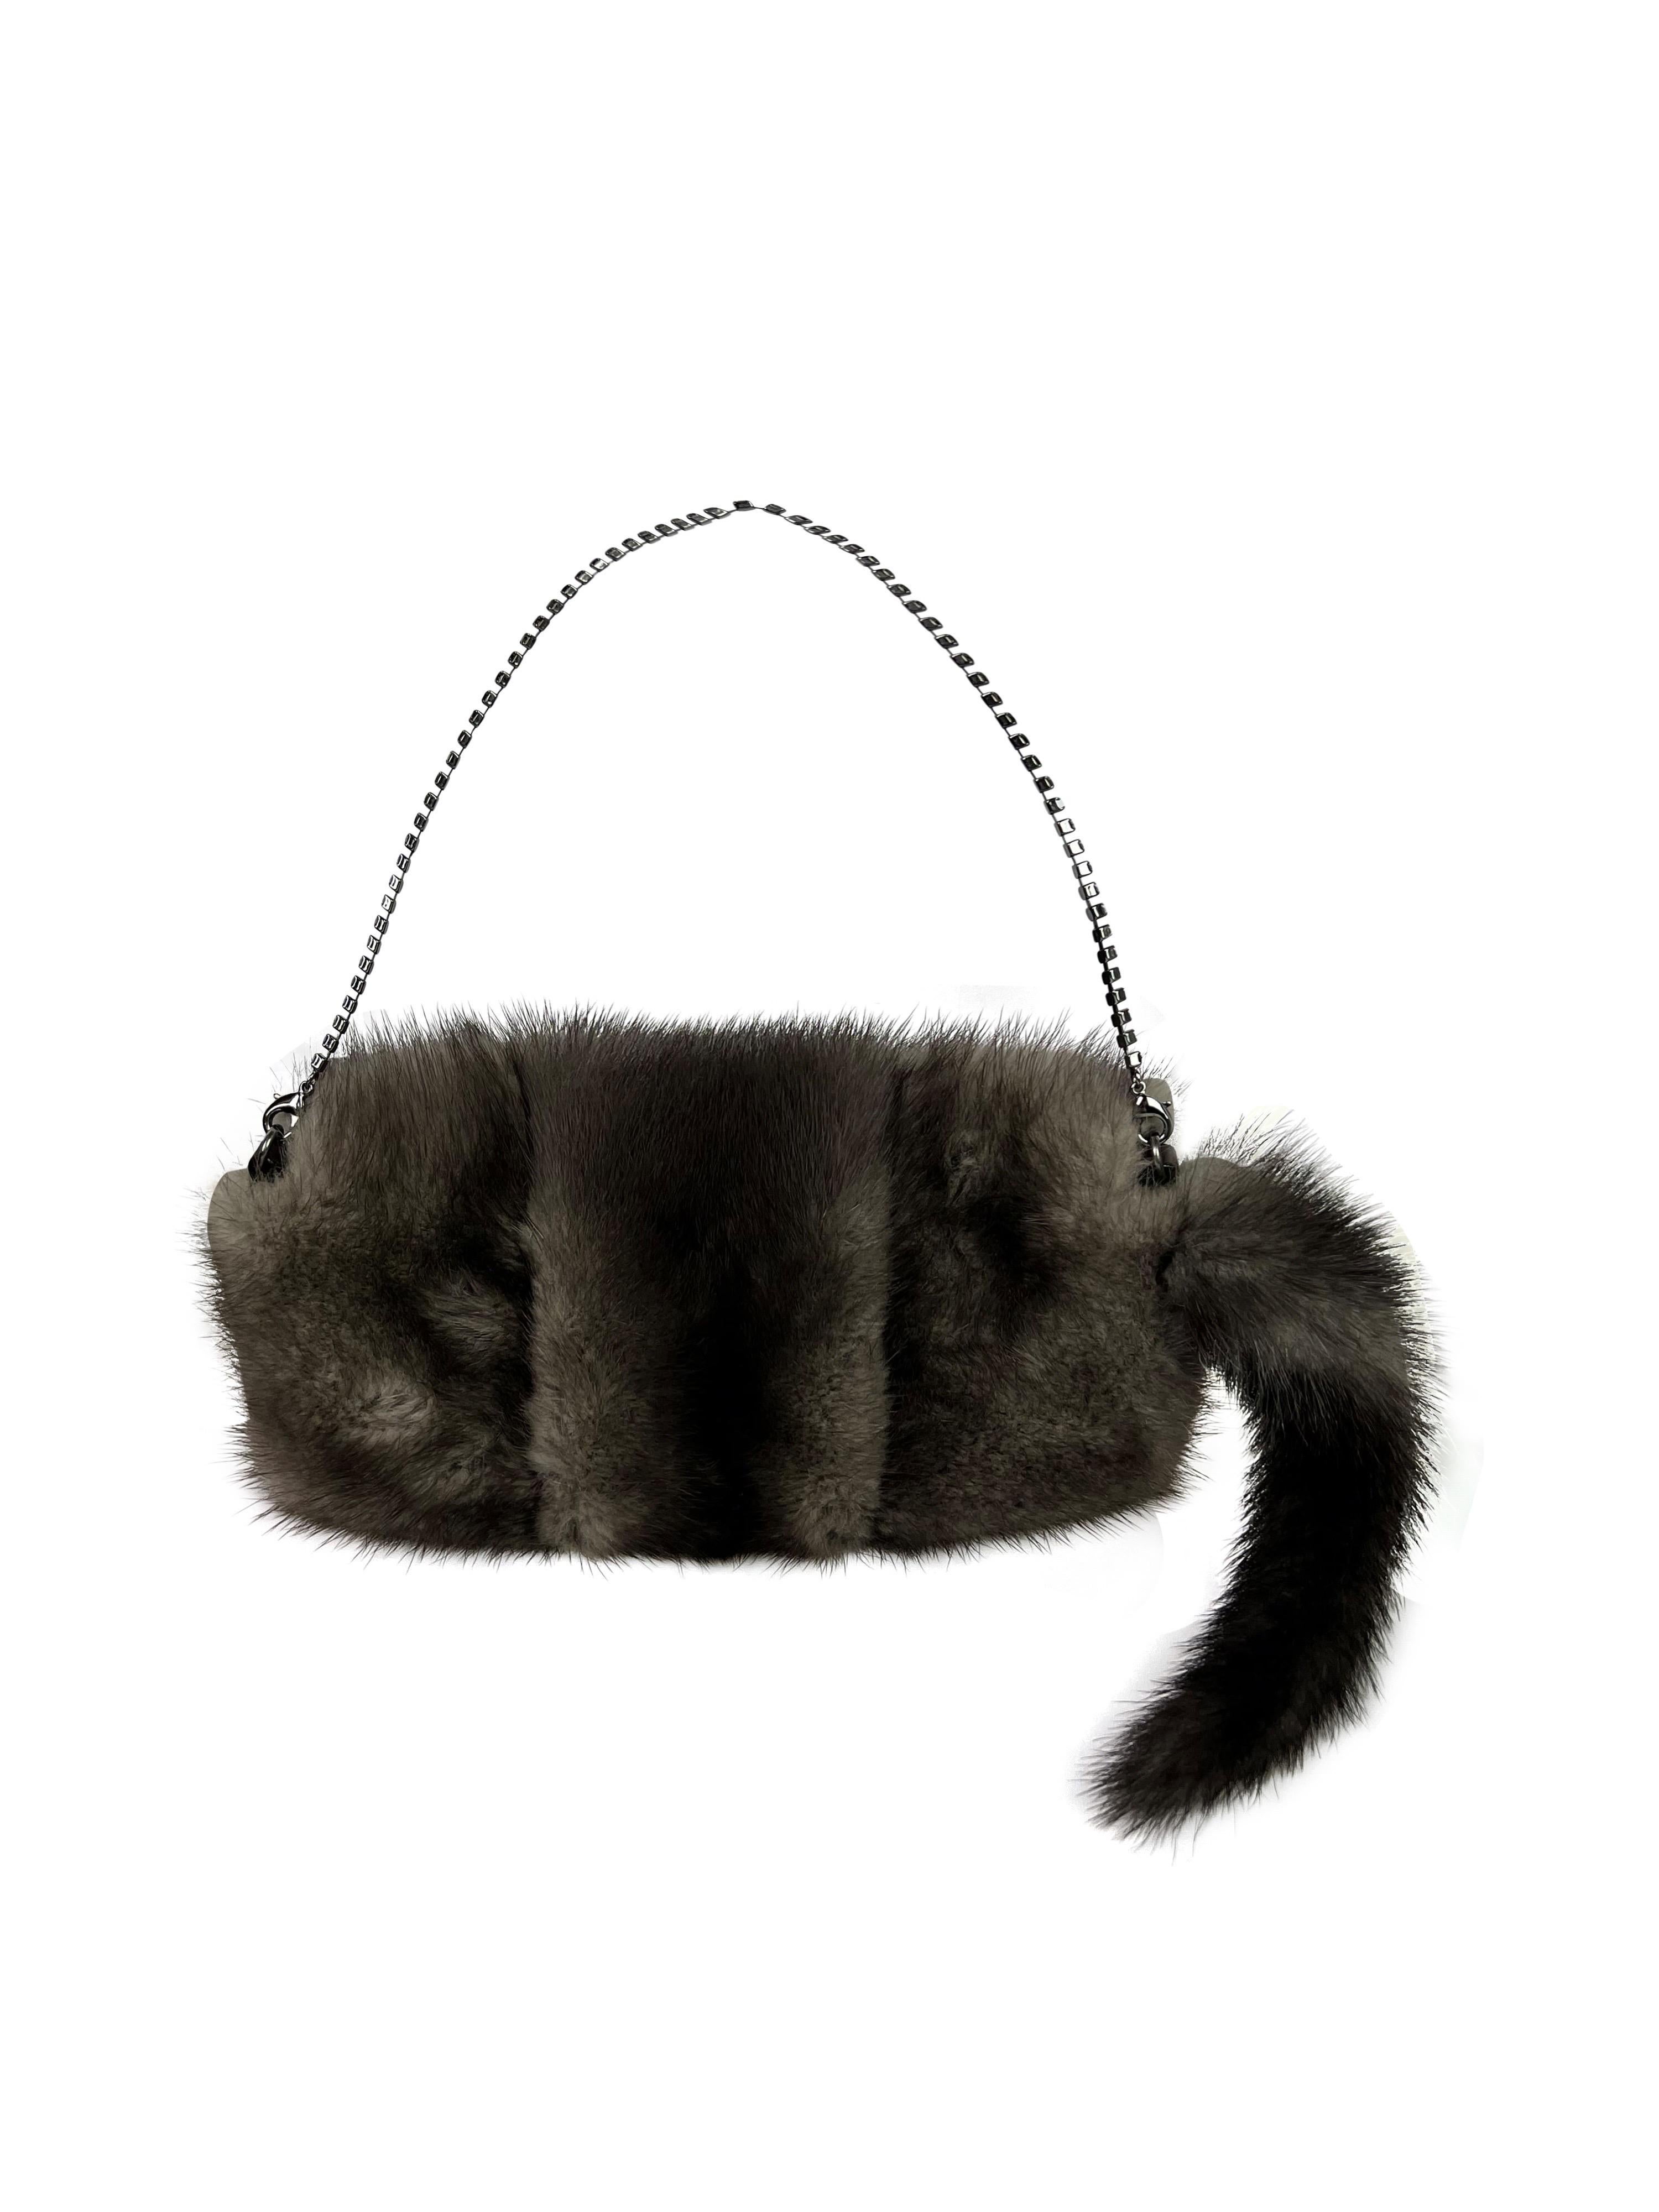 An iconic mini bag with a Swarovski chain handle and a stunning embellishments, made out of genuine mink fur.

The bag is in an excellent vintage condition with a faint lipstick stain on the inside *please see the photo. 

Height: 10 cm (4